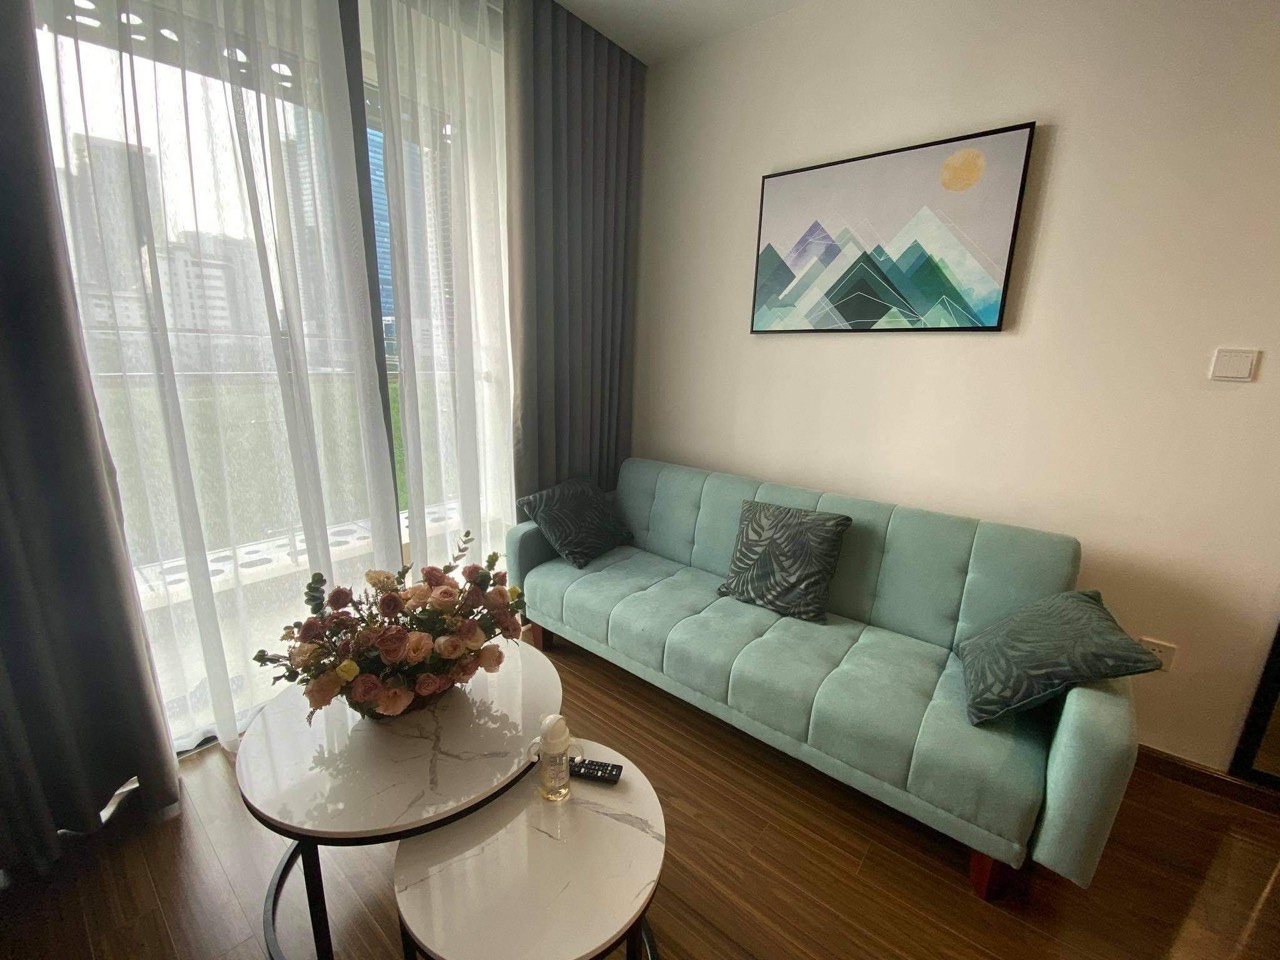 *Reserve Now for this shiny modern Condominium in Vinhomes West Point Hanoi*